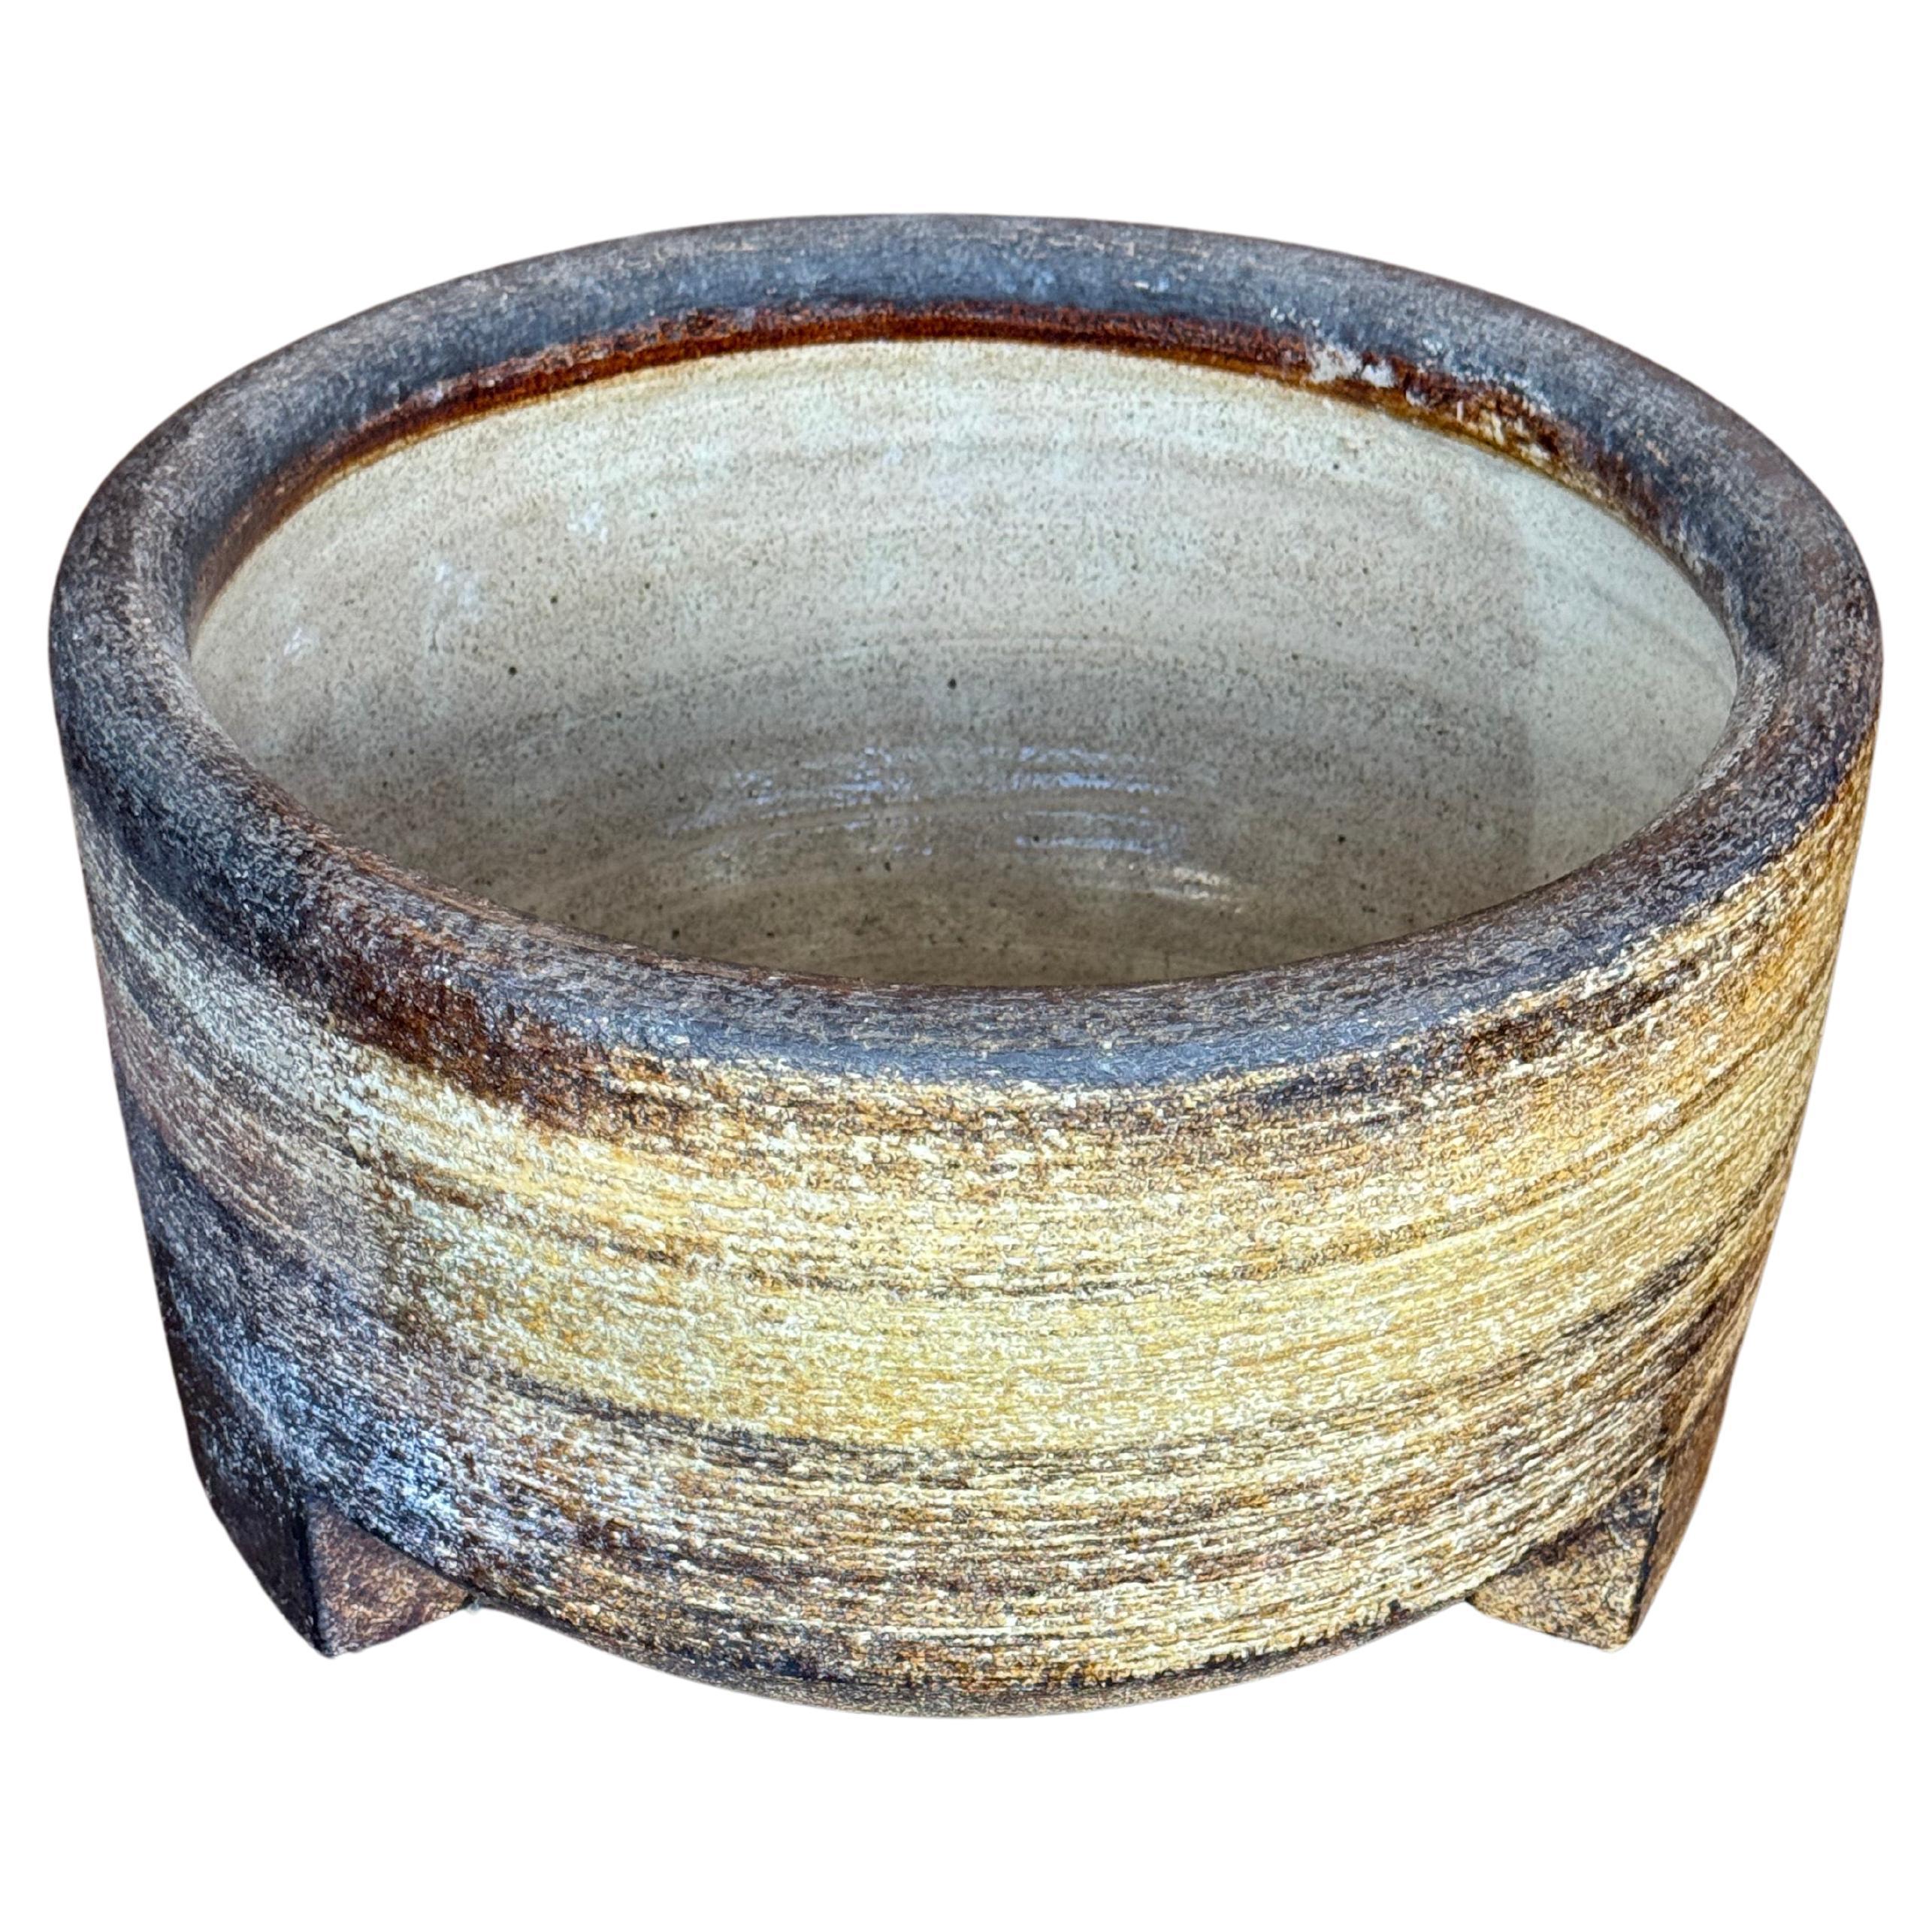 Introducing our Vintage Hand-Carved Solid Stone Planter/Bowl—a masterpiece of timeless elegance. Hand-carved with textural details, it boasts a honed, brushed finish that enhances the stone's natural beauty. With sturdy stone feet, it's suitable for